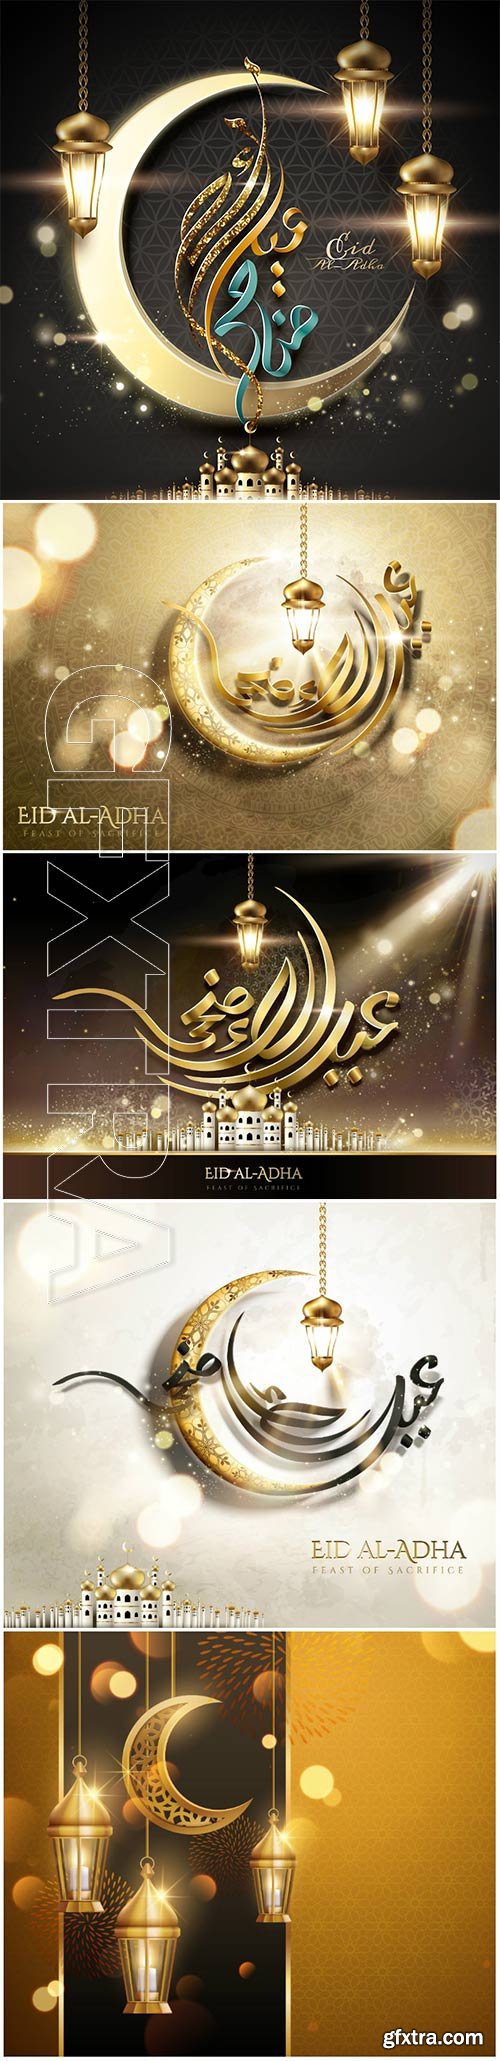 Eid al-adha calligraphy card vector design with hanging lanterns, golden crescent with floral pattern